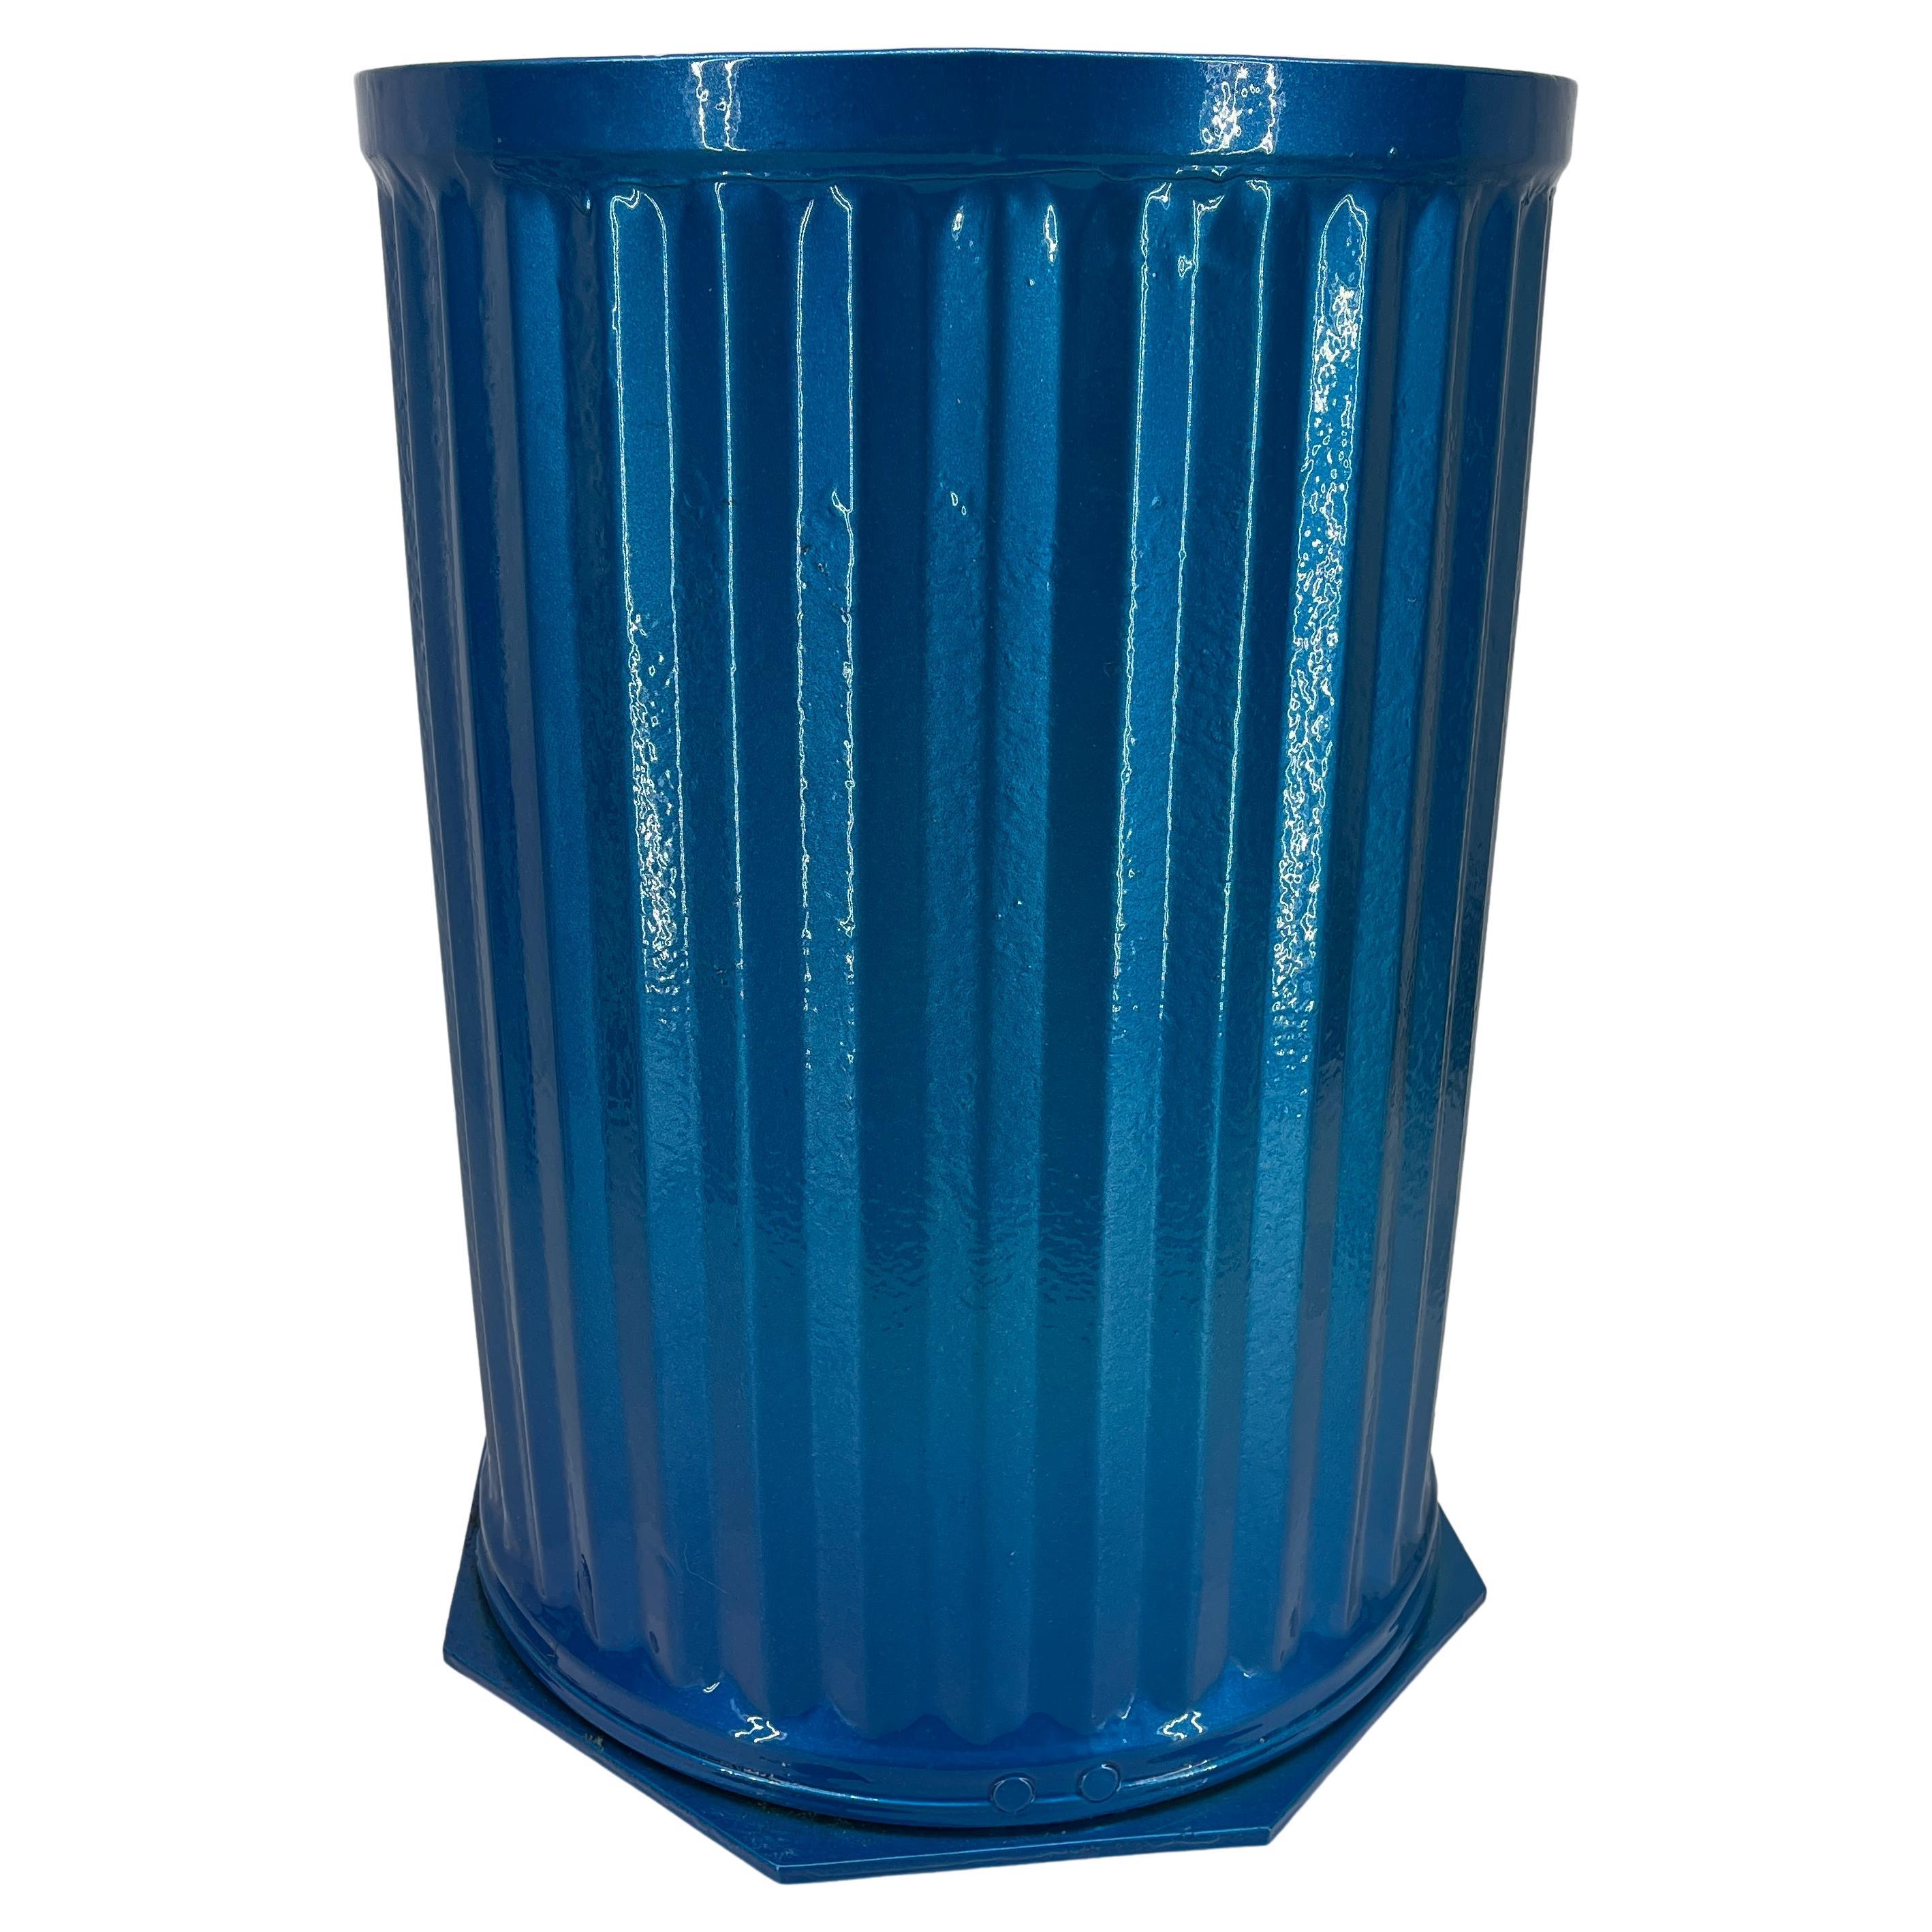 Powder-Coated Powder Coated Blue Industrial Metal Bin, Umbrella Stand or Trash Can For Sale